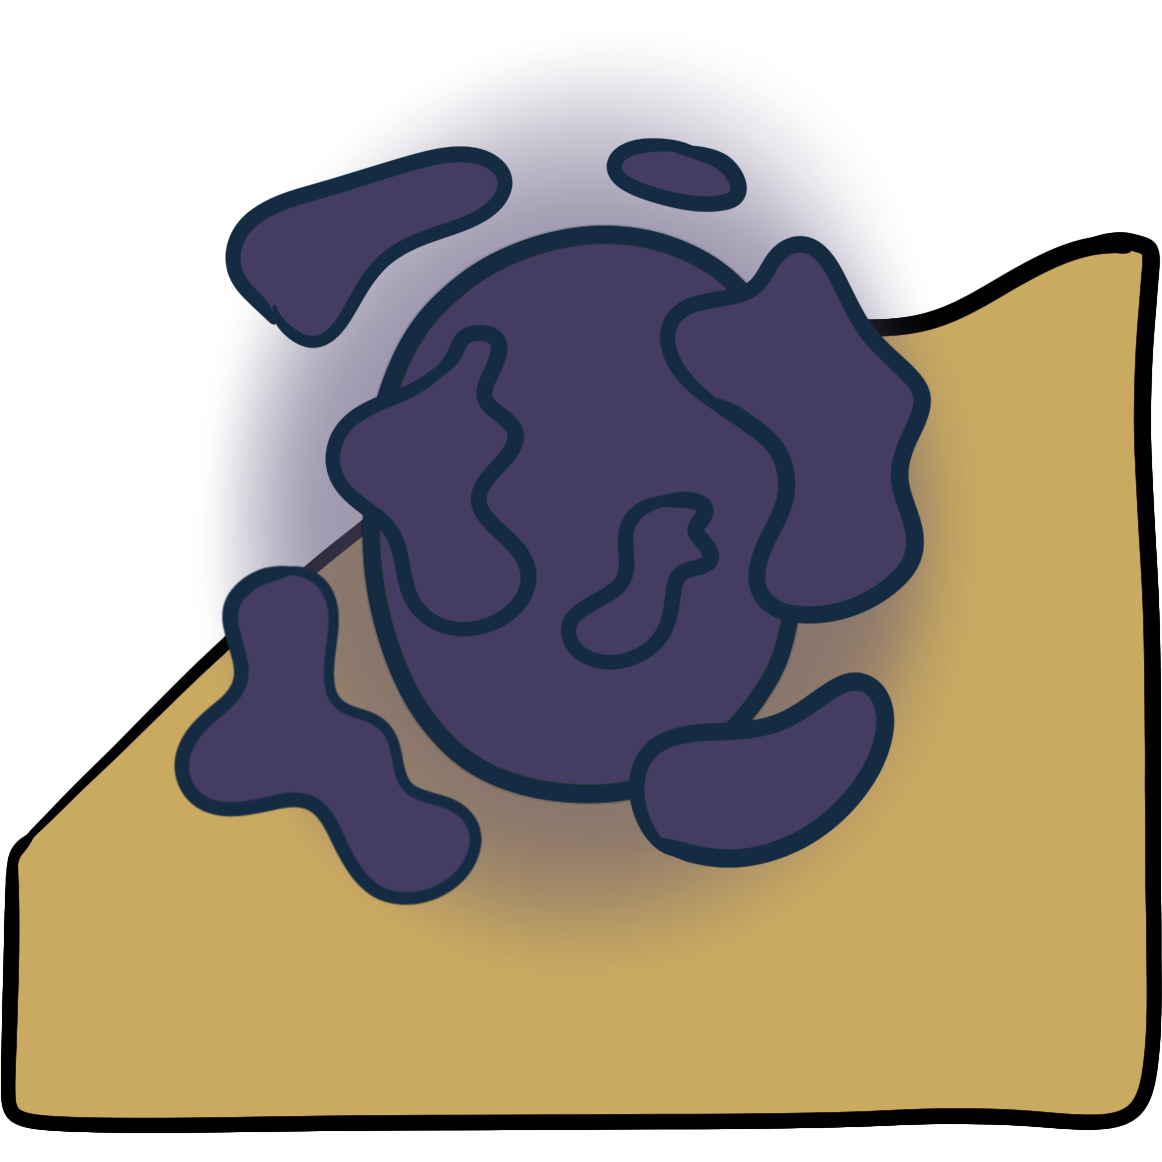 Dark purple oval with blobs around it. Curved yellow skin fills the bottom half of the background.